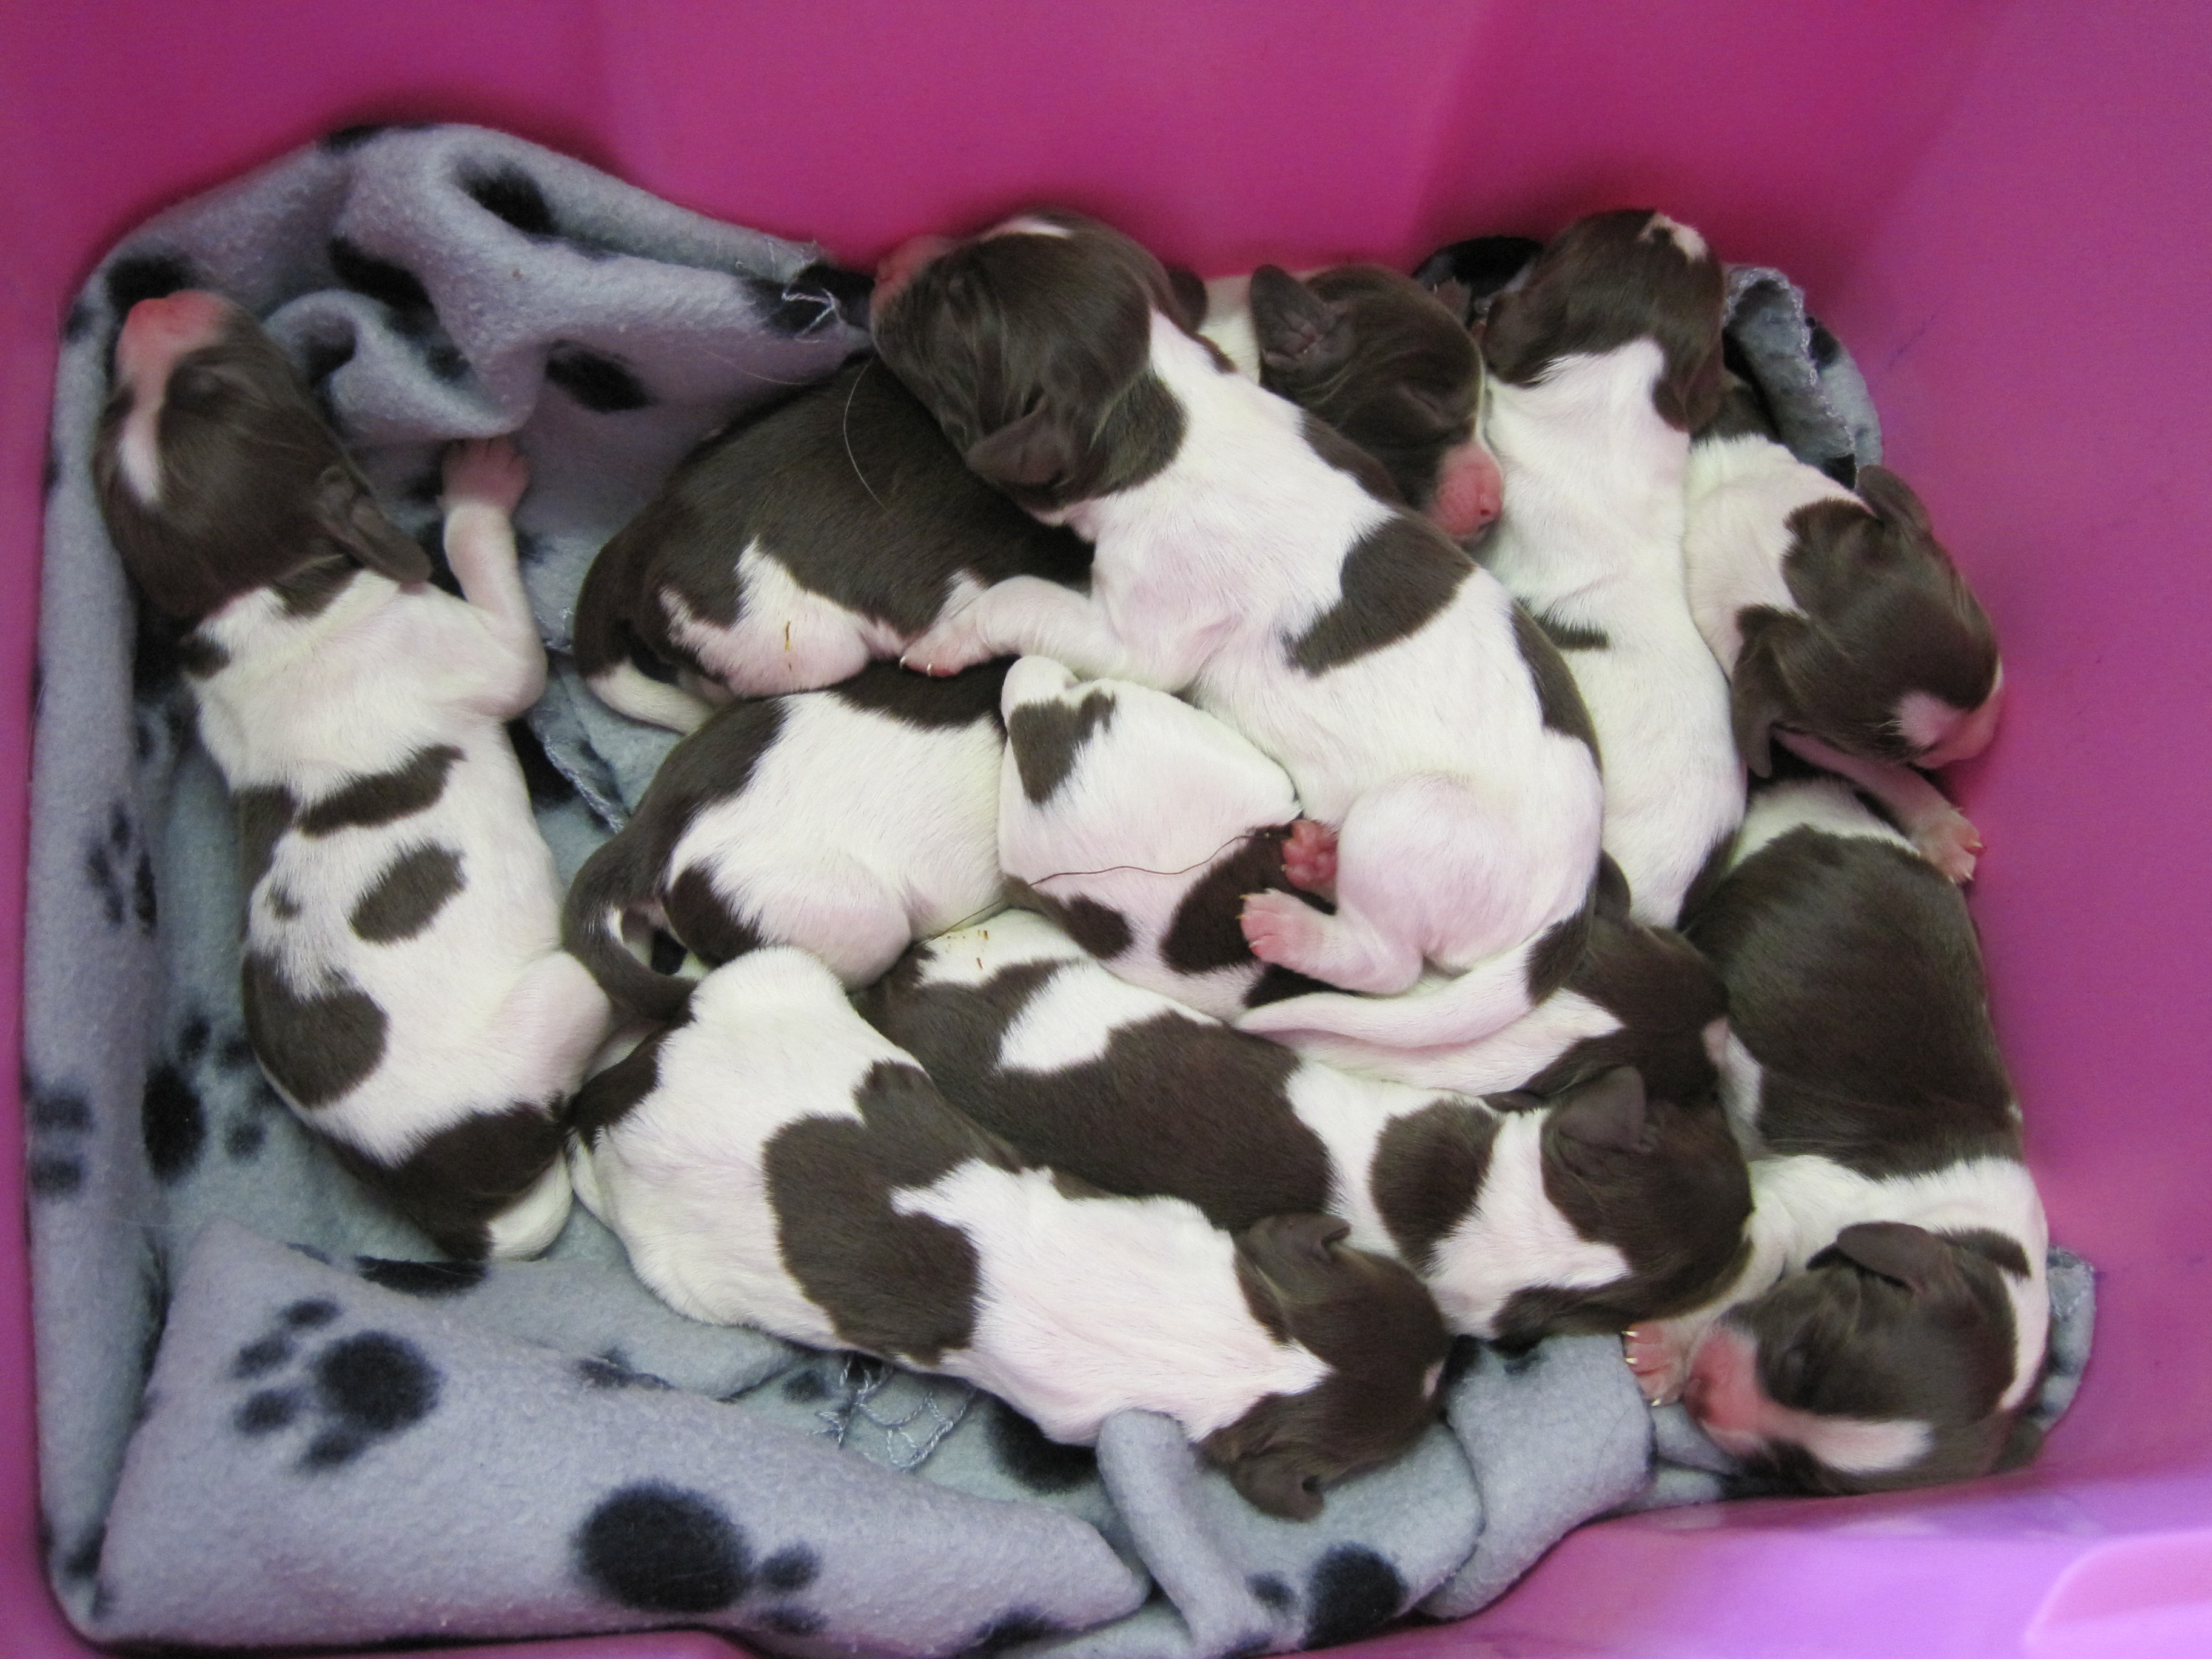 "2 day old puppies